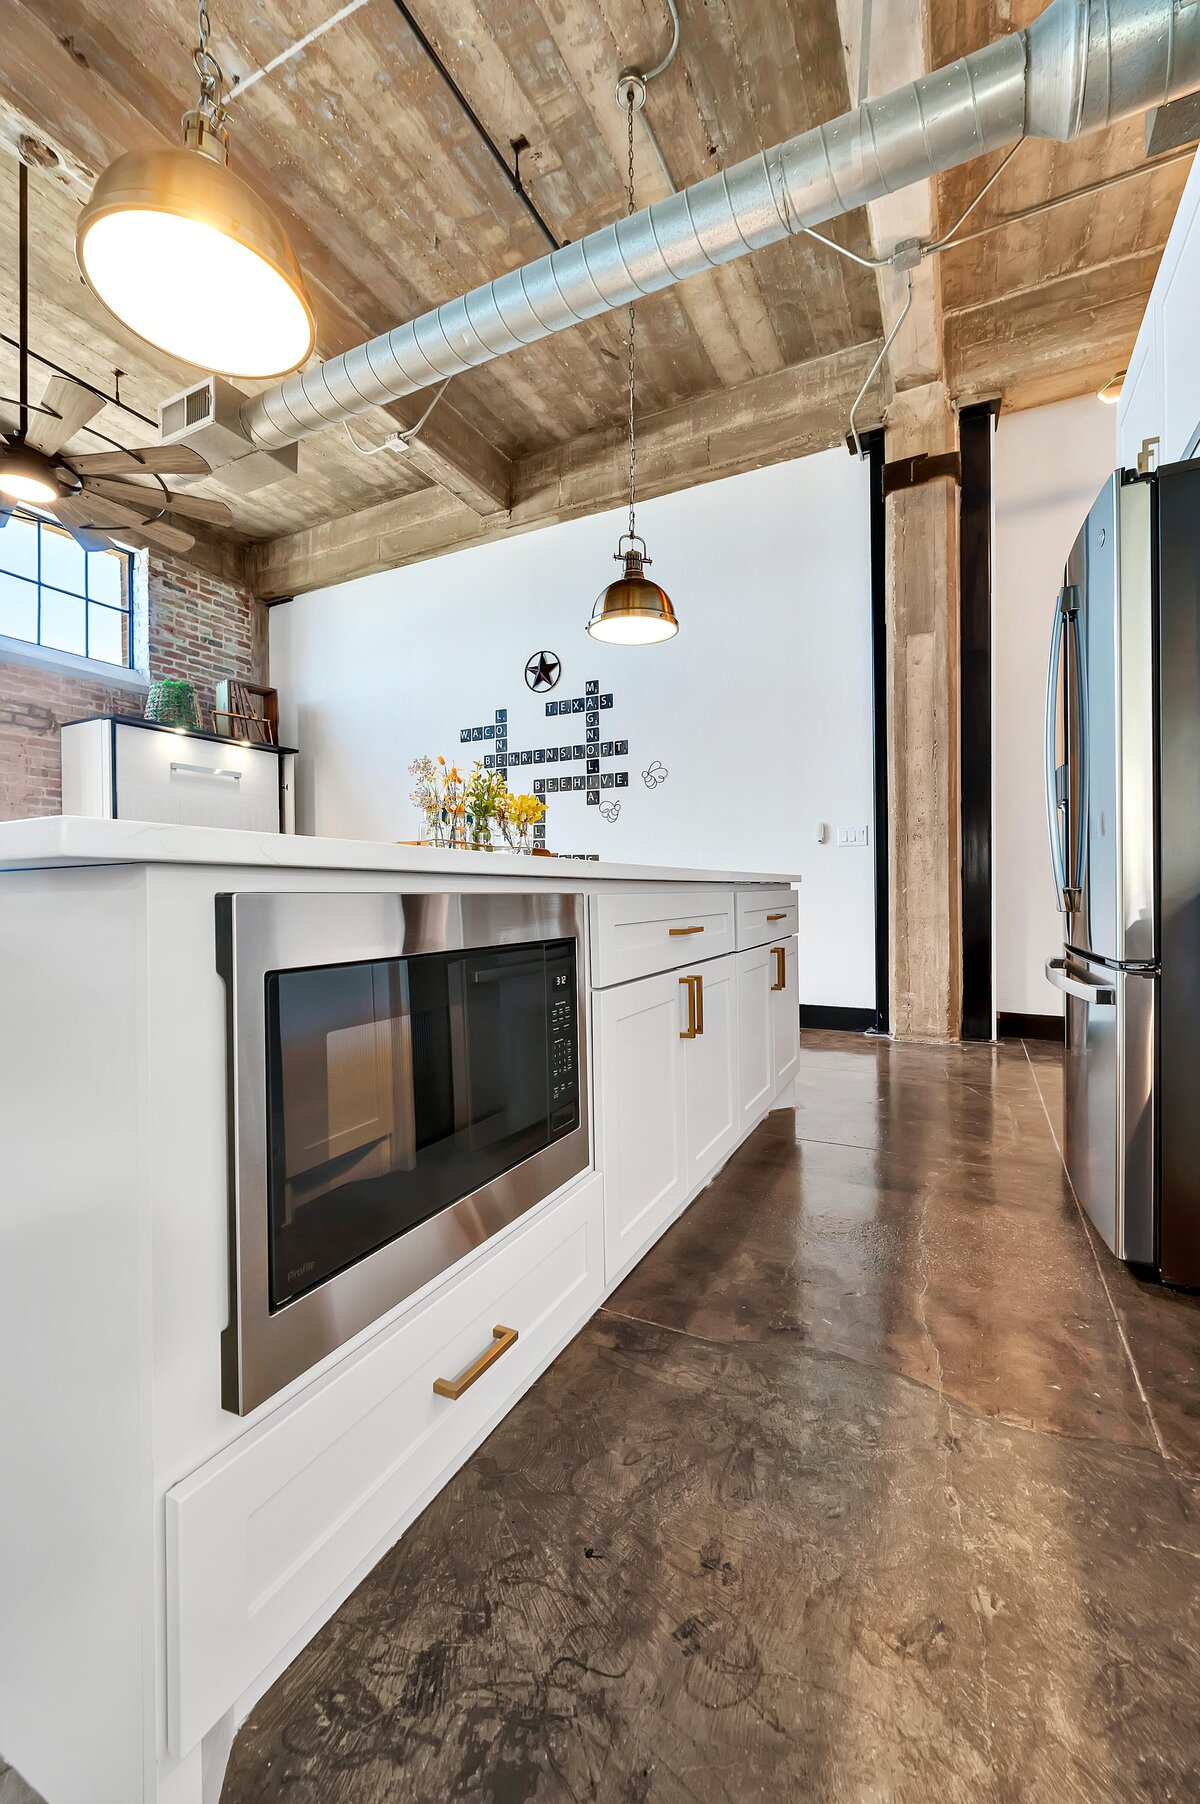 Beautiful kitchen island with view of the living area in this one-bedroom, one-bathroom vintage condo that sleeps 4 in the historic Behrens building in the heart of the Magnolia Silo District in downtown Waco, TX.